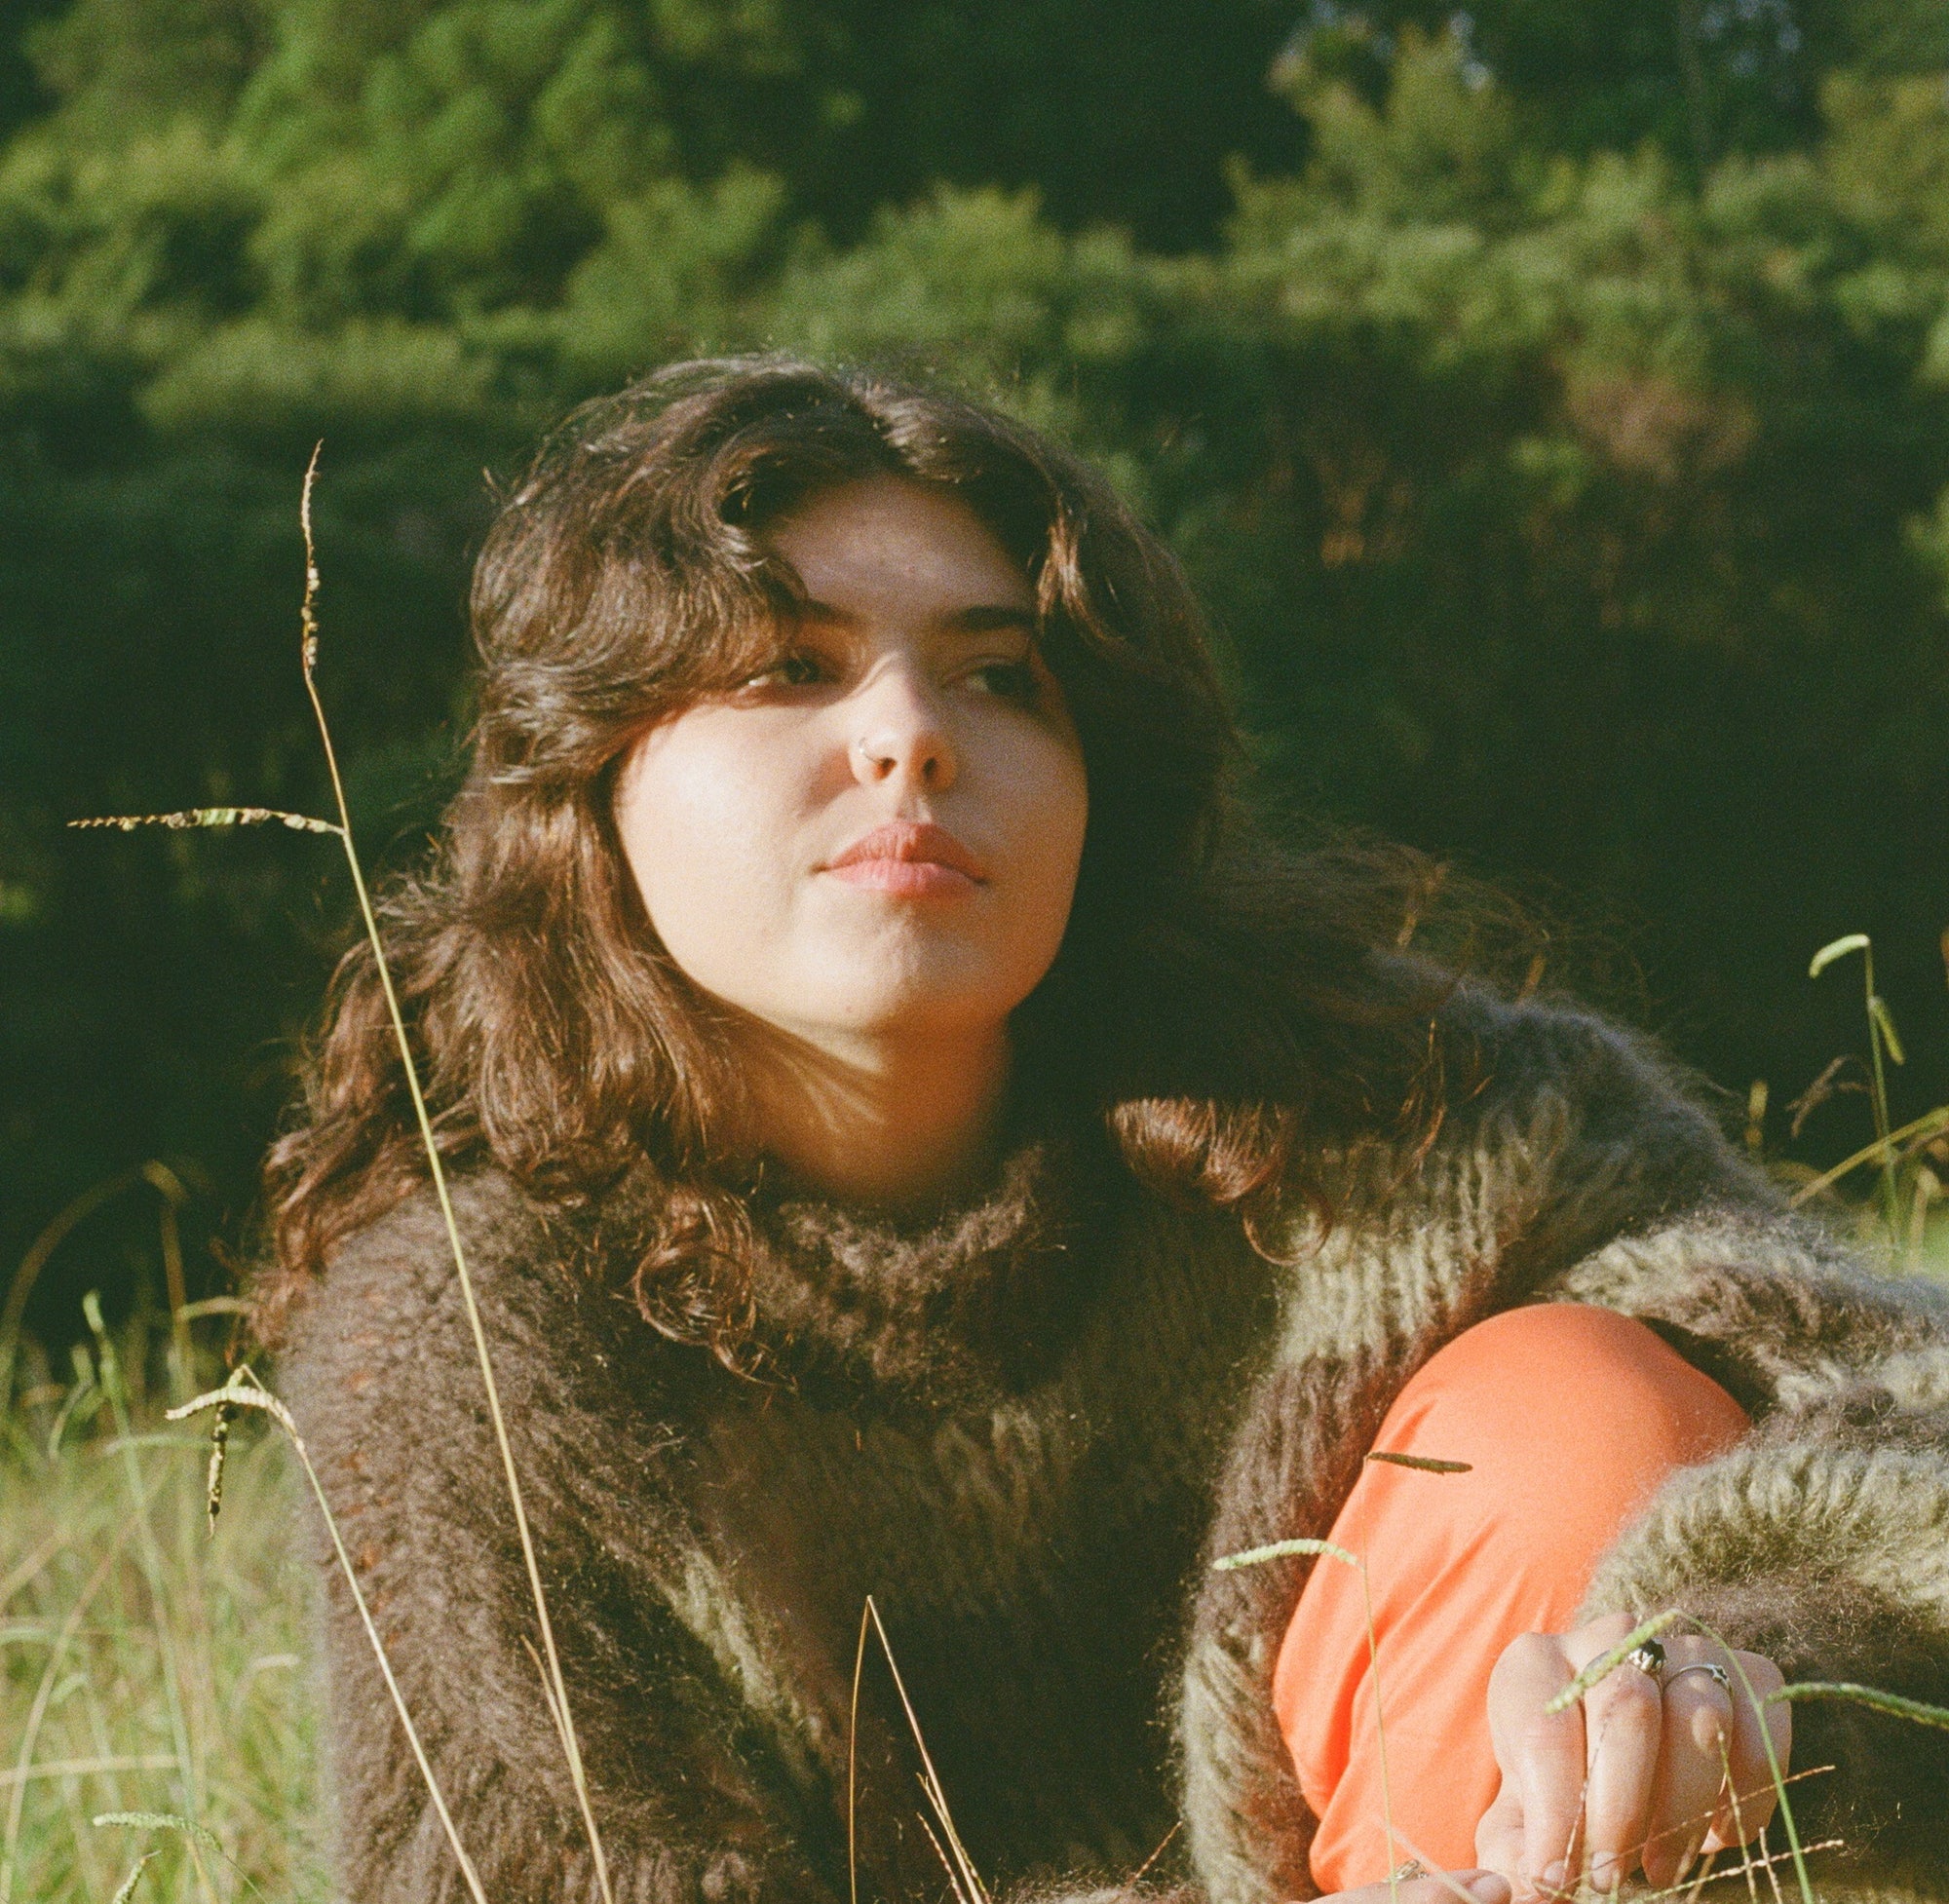 Lilly Carron shares her latest single ‘Hands’, produced by Balu Brigada and Tom Young